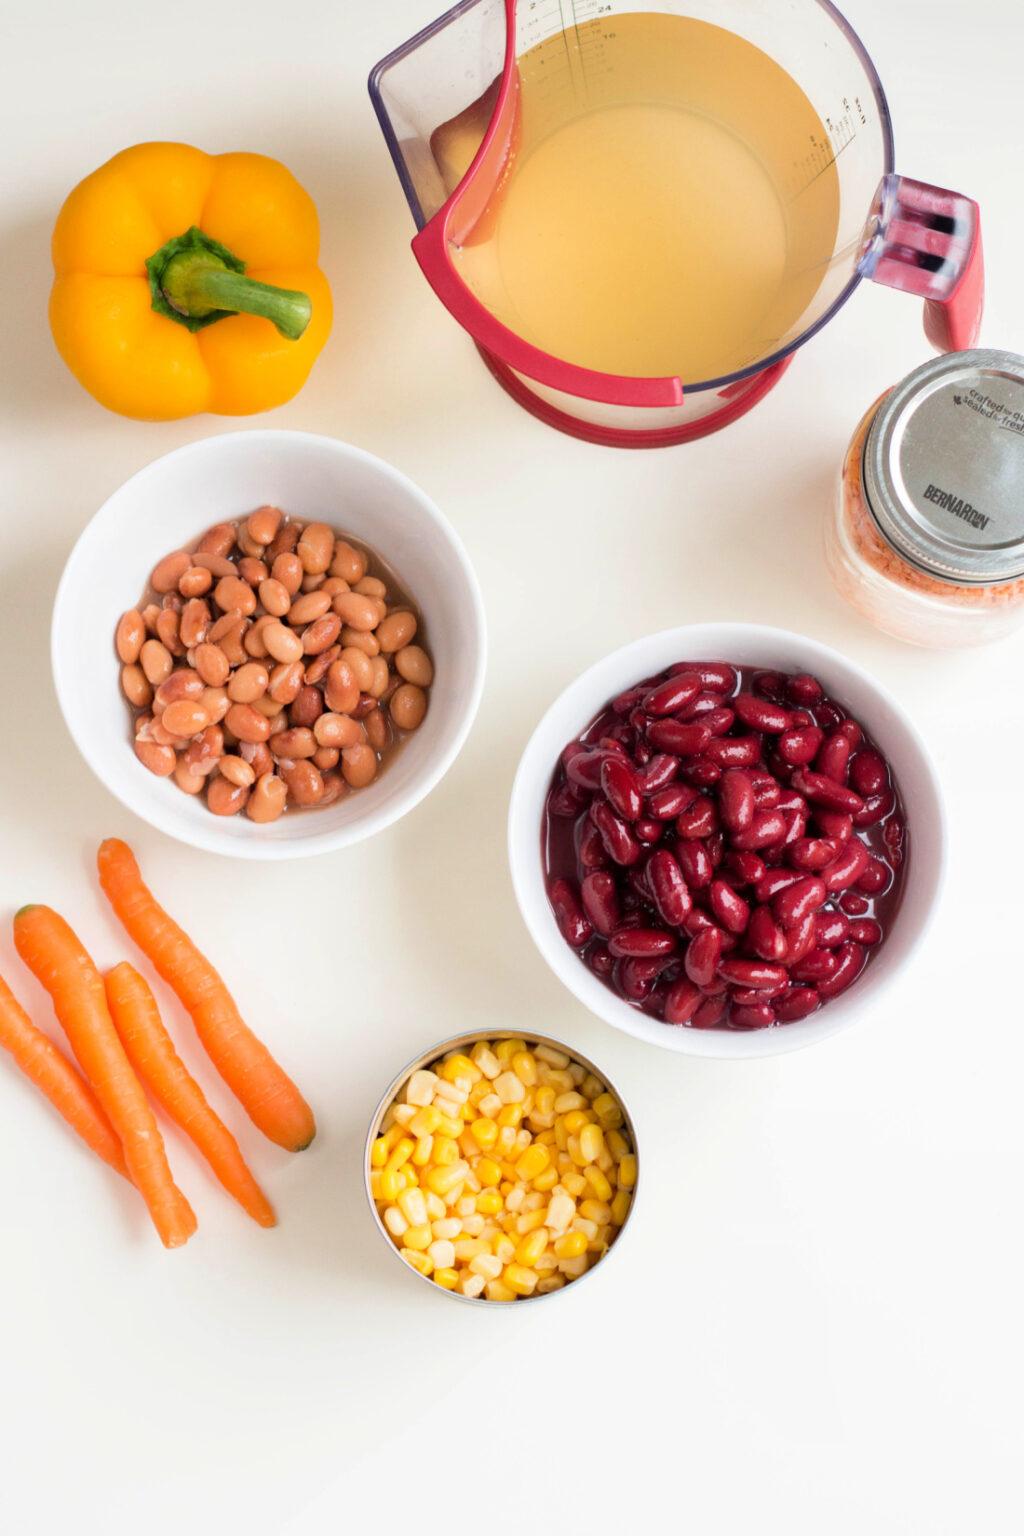 Various ingredients for cooking Instant Pot Vegetarian Chili displayed on a white surface, including bowls of beans, corn, carrots, a bell pepper, and a jug of liquid.